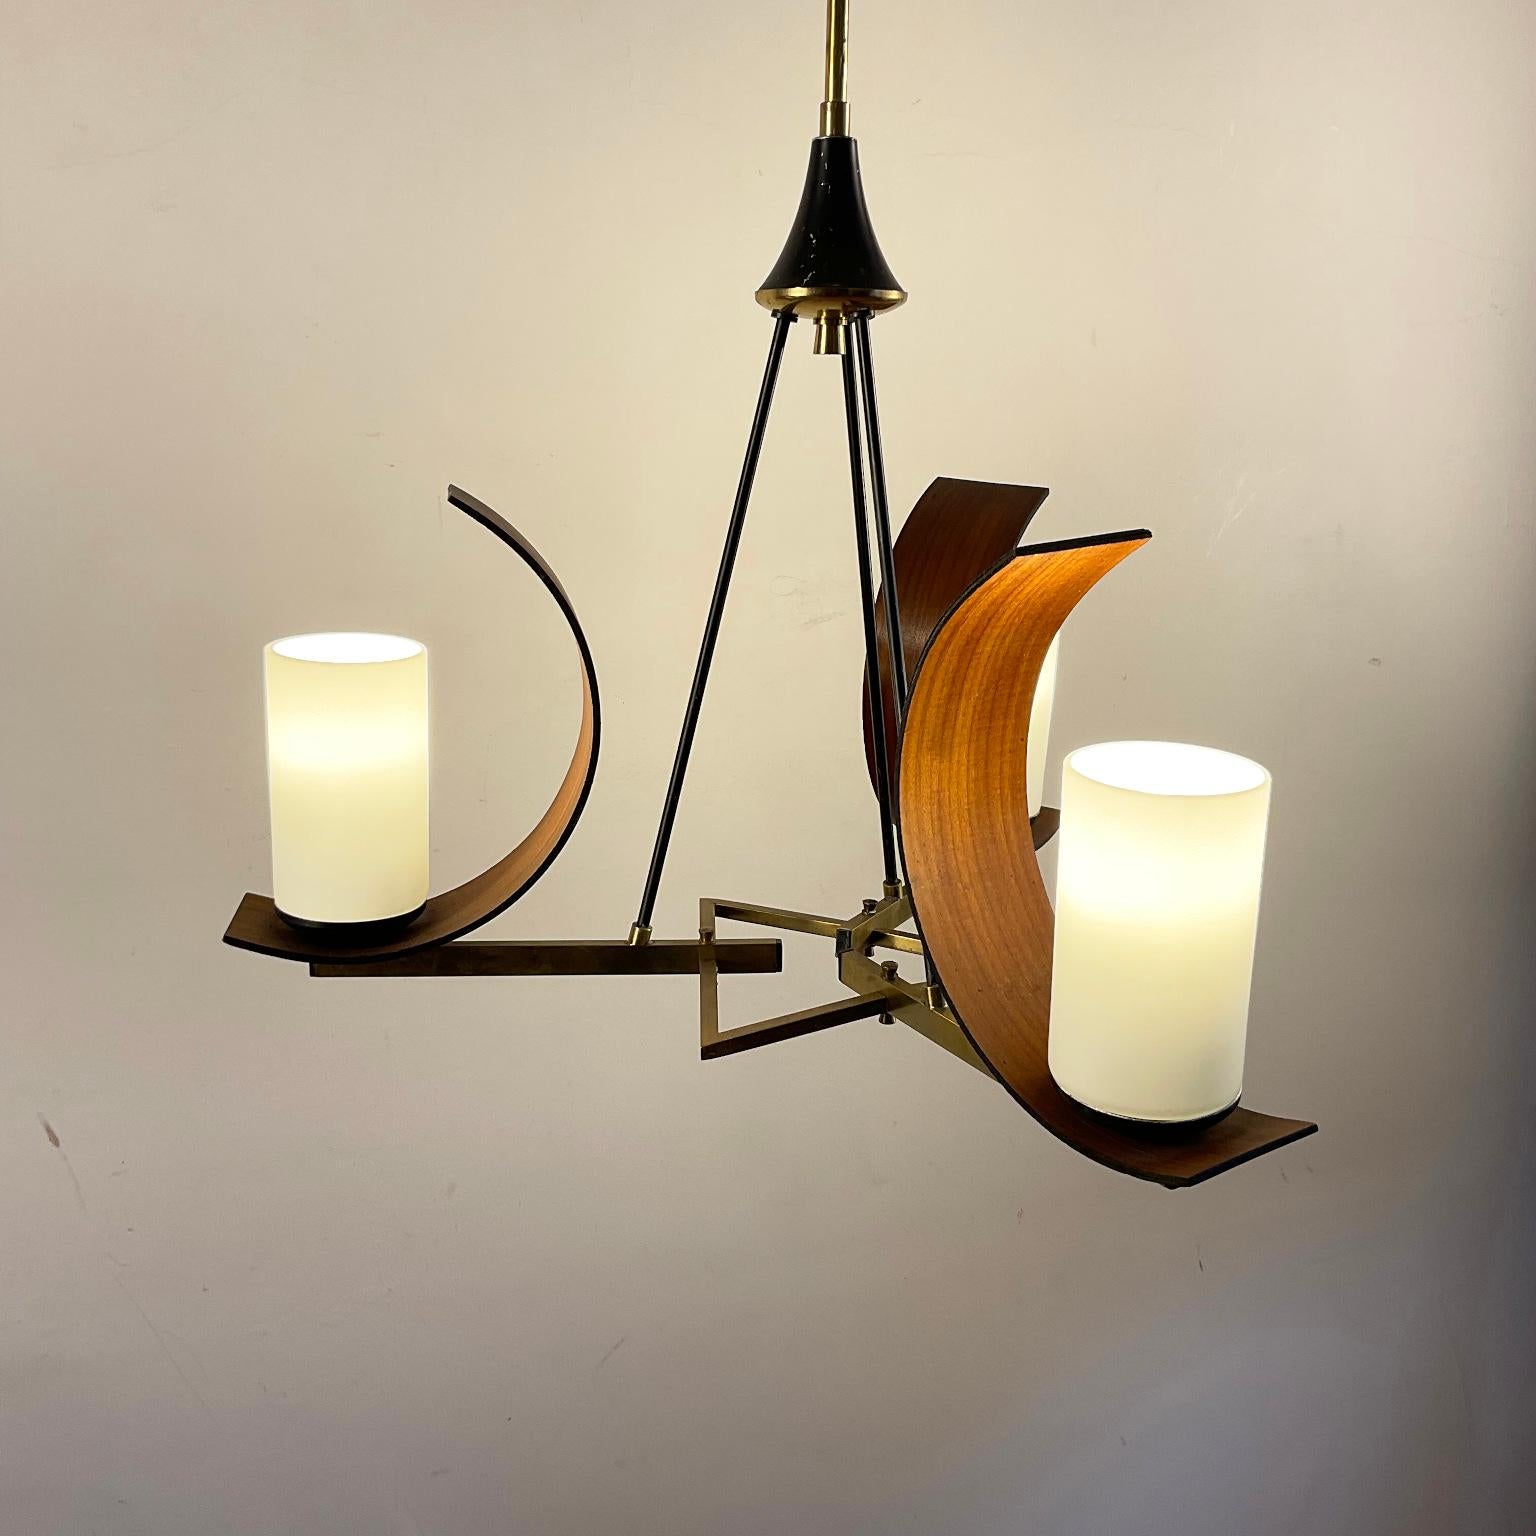 1960s Italian Ceiling Lamp Attributed to Stilnovo with 3 Opaline lampshades 1